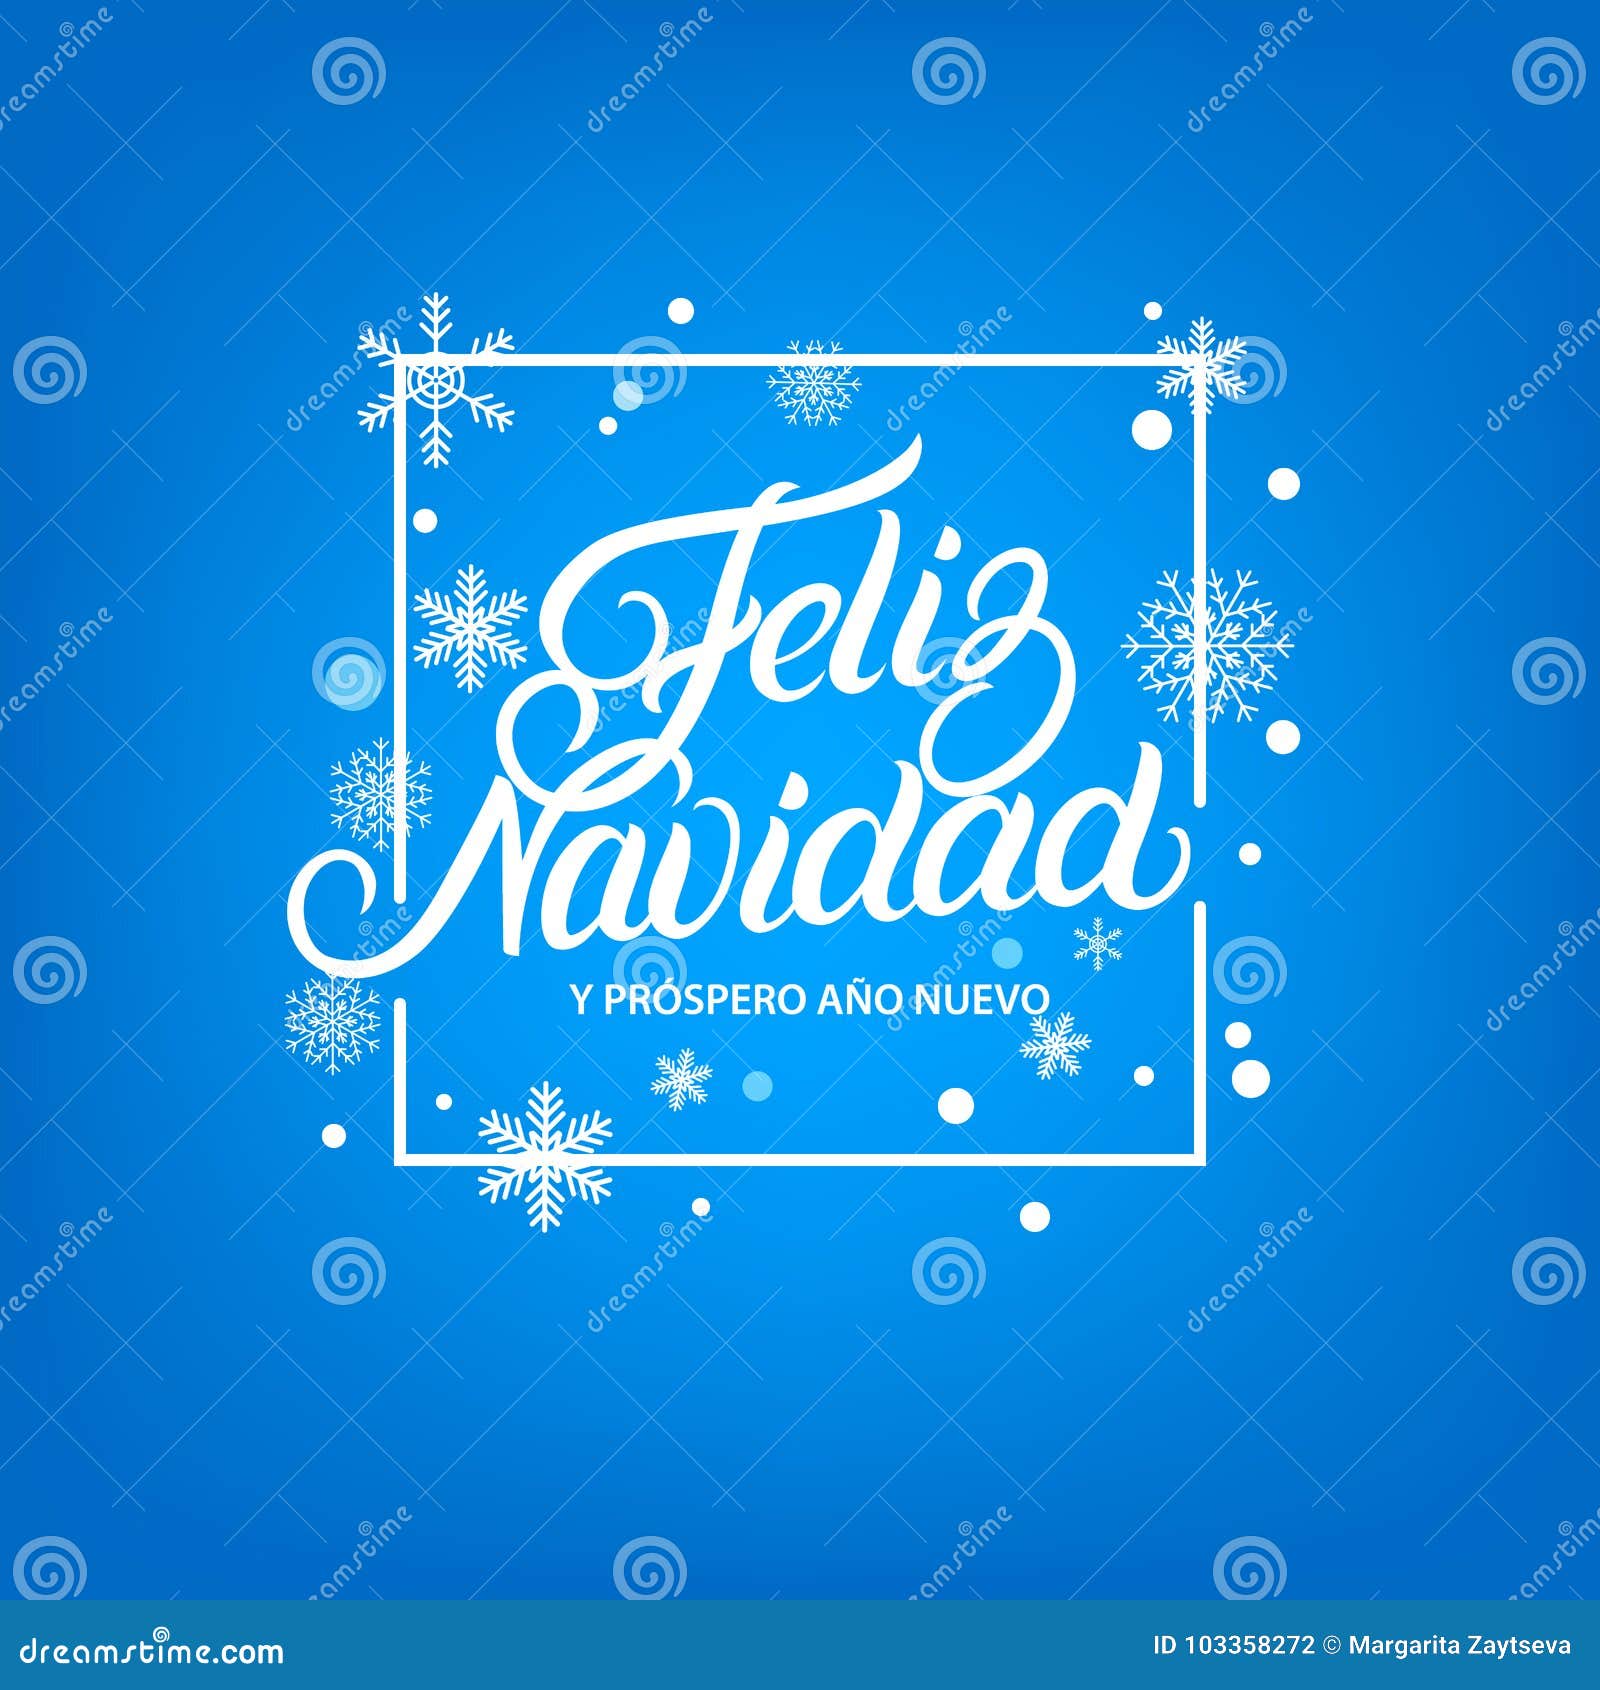 feliz navidad hand written lettering. frame with falling snow and snowflakes.